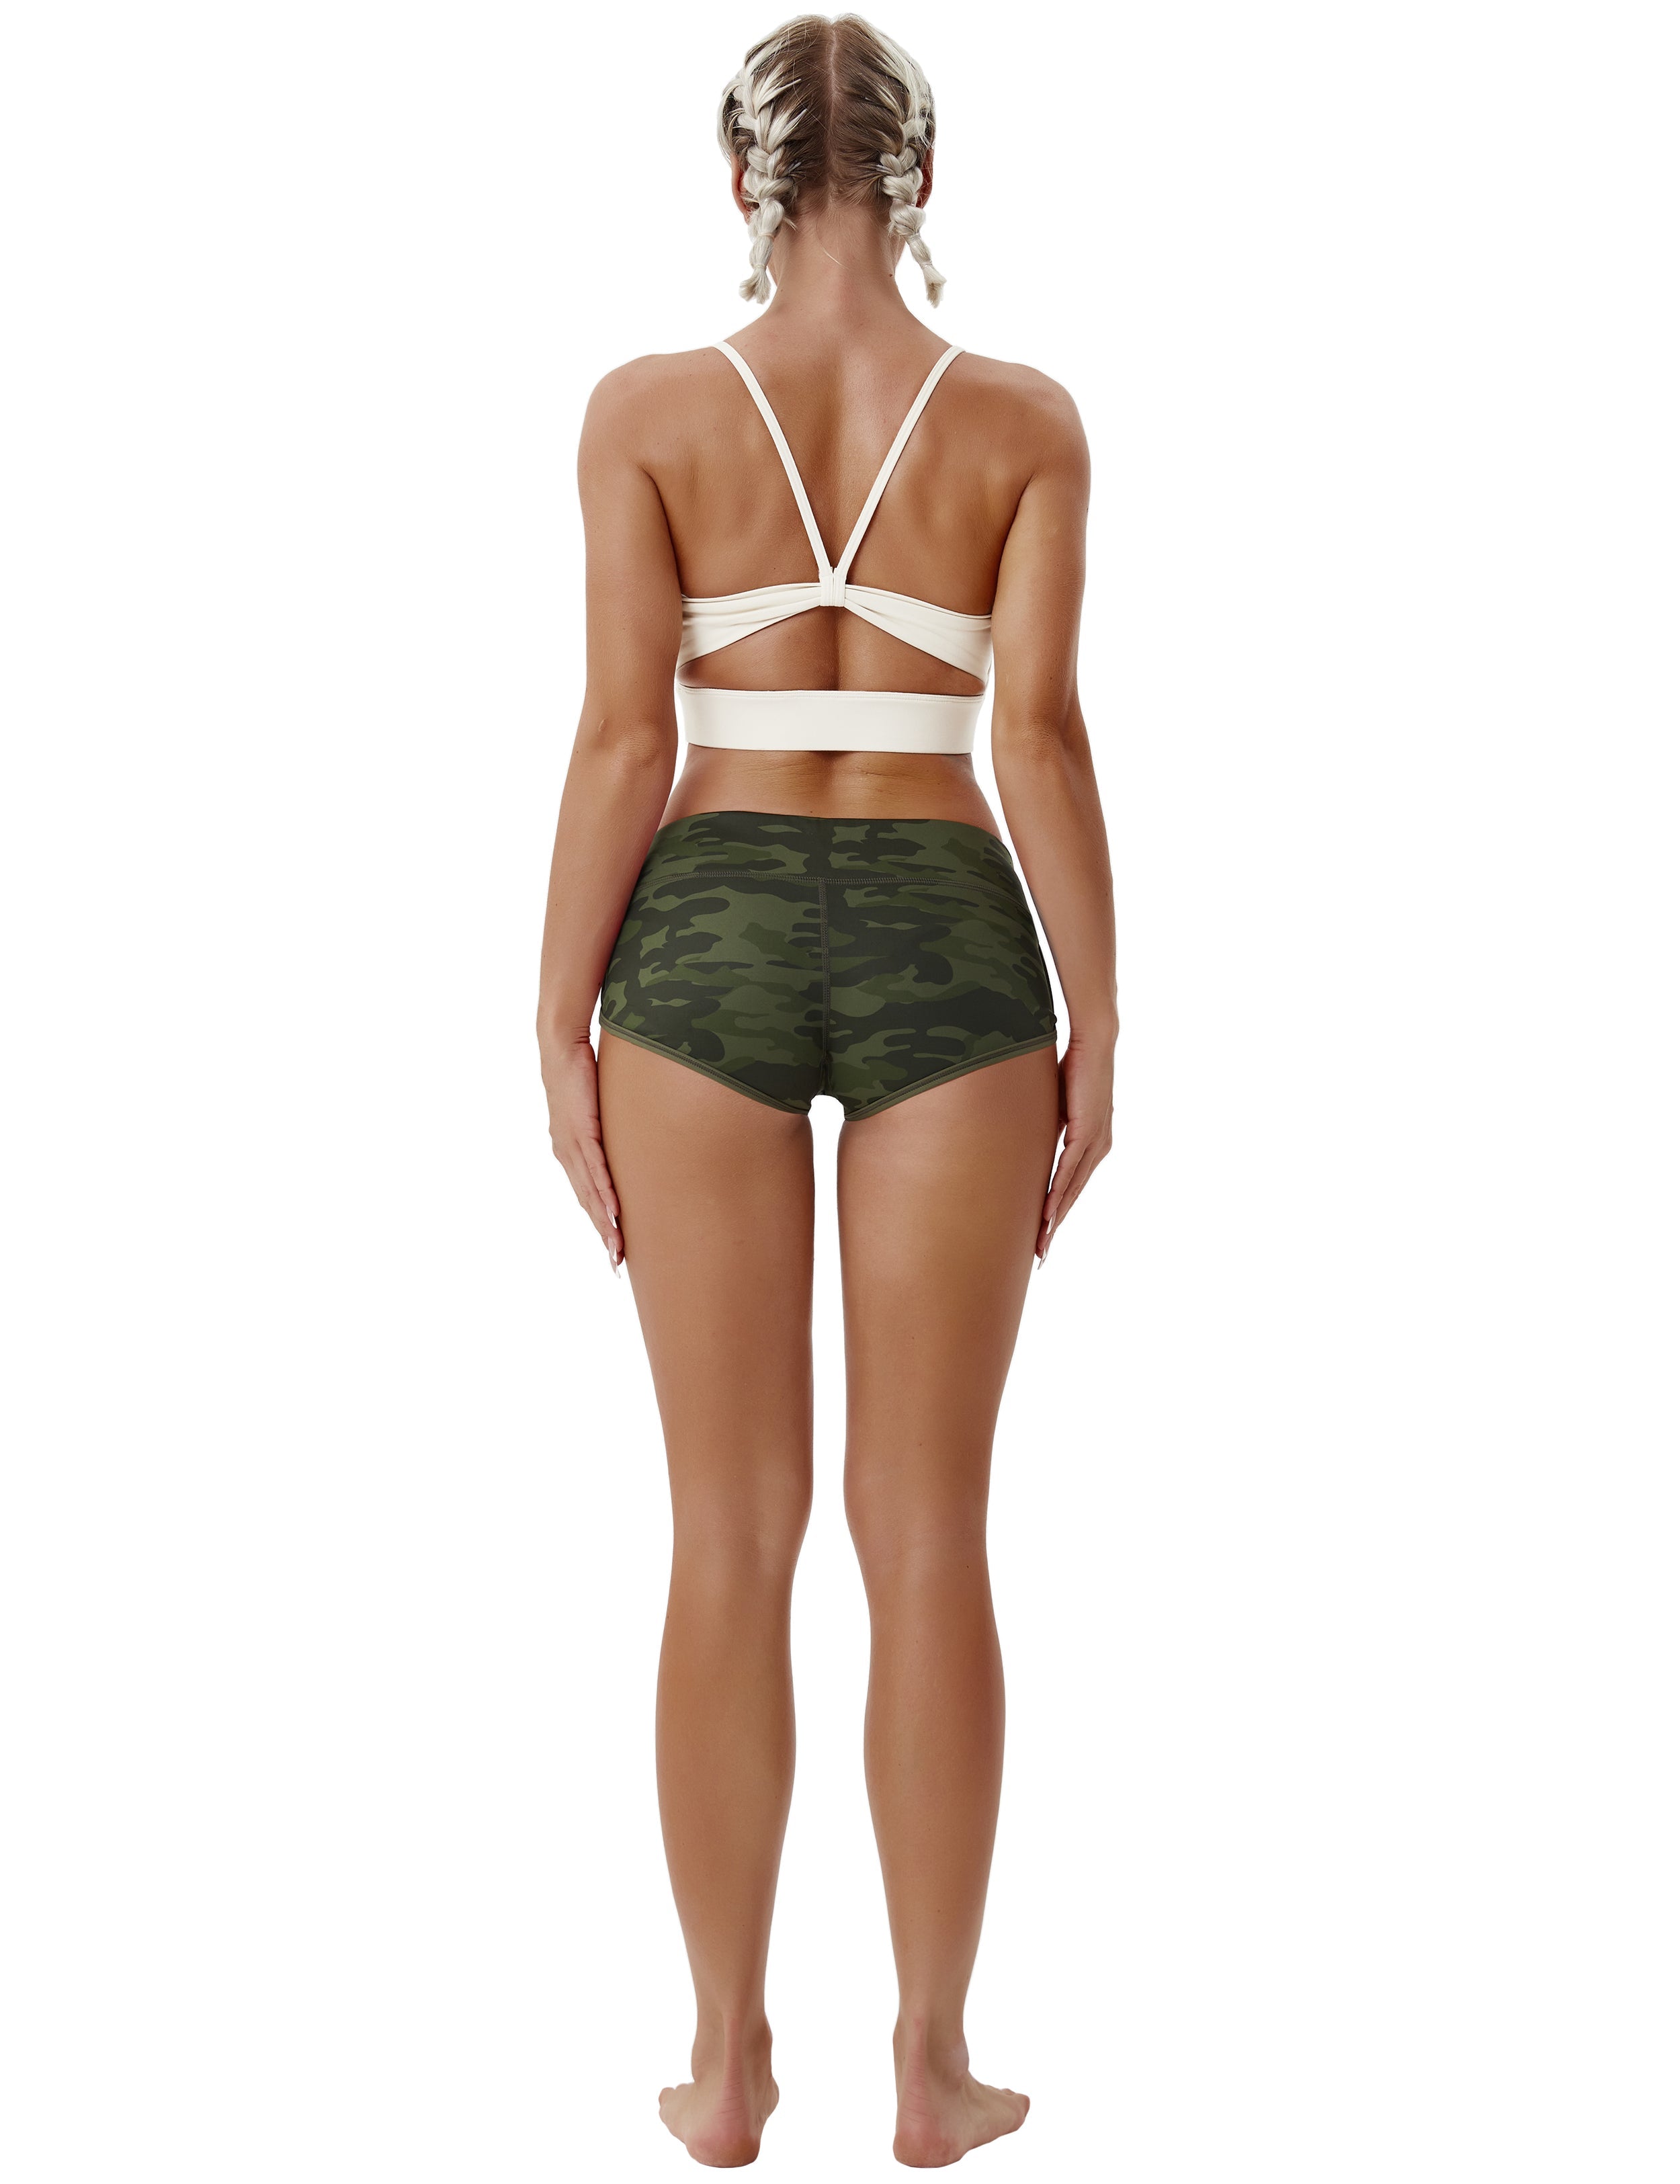 Printed Booty Jogging Shorts green camo Sleek, soft, smooth and totally comfortable: our newest sexy style is here. Softest-ever fabric High elasticity High density 4-way stretch Fabric doesn't attract lint easily No see-through Moisture-wicking Machine wash 78% Polyester, 22% Spandex